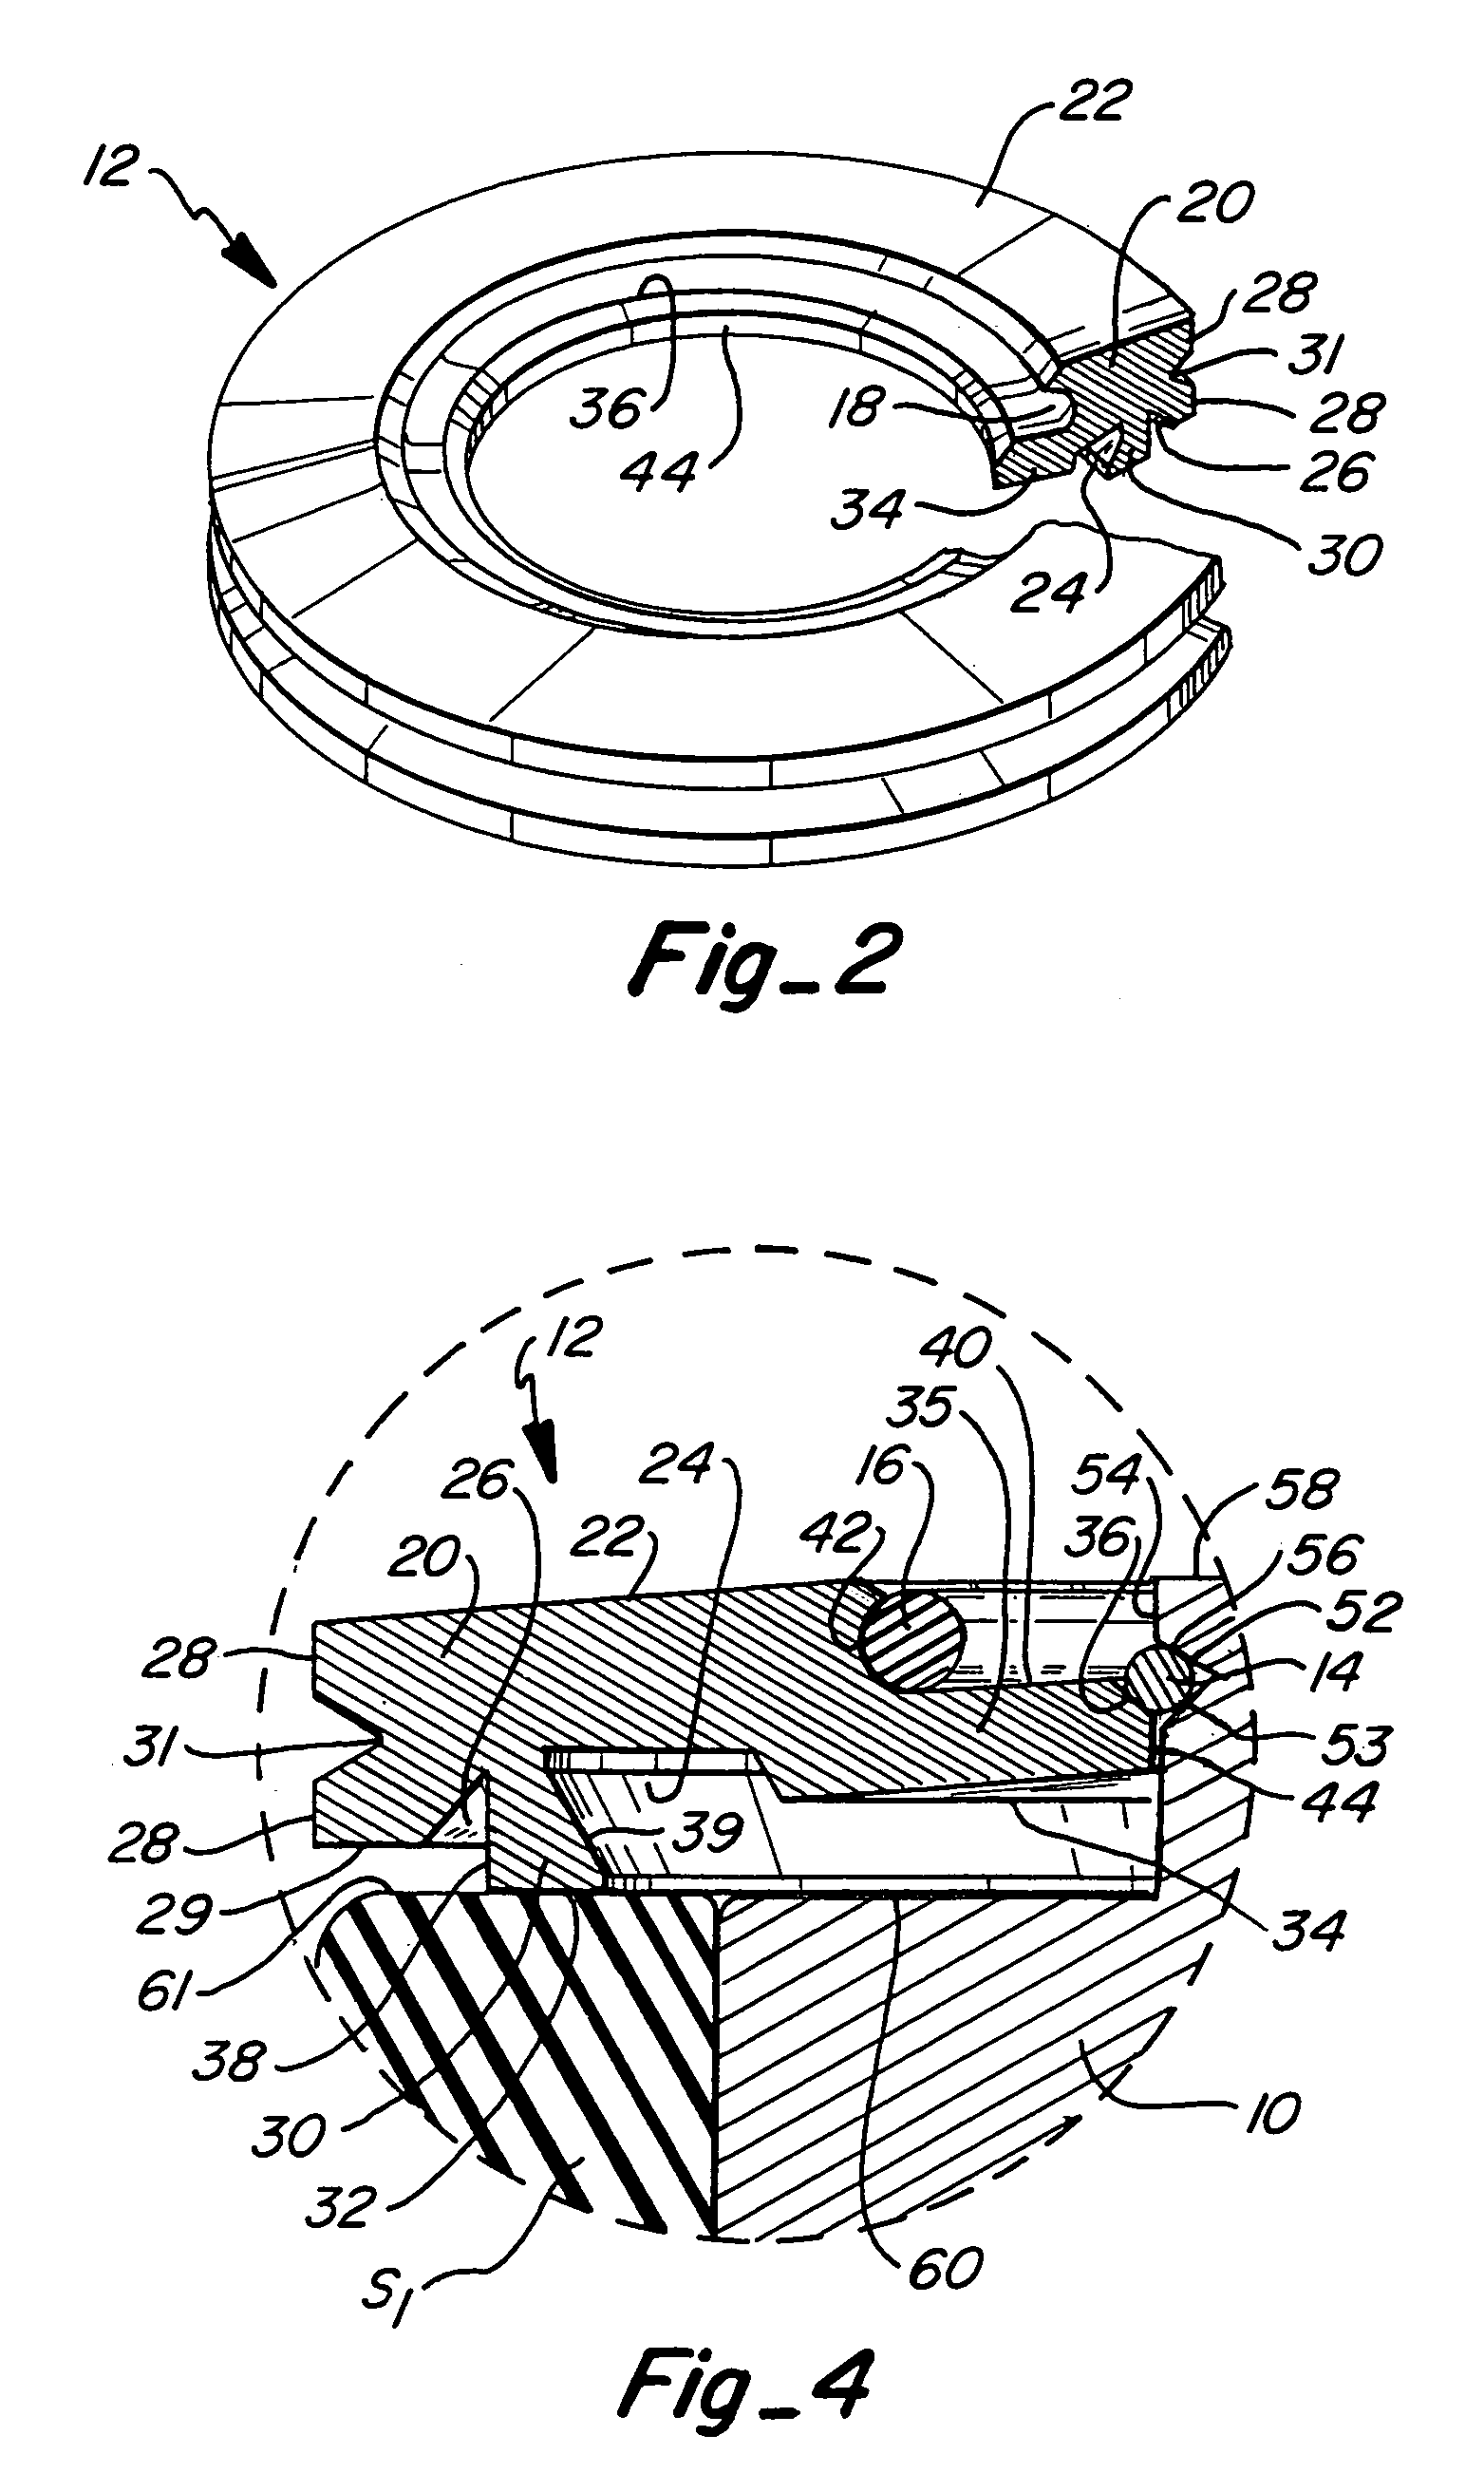 Method of installing a disk clamp over a hub of a disk drive